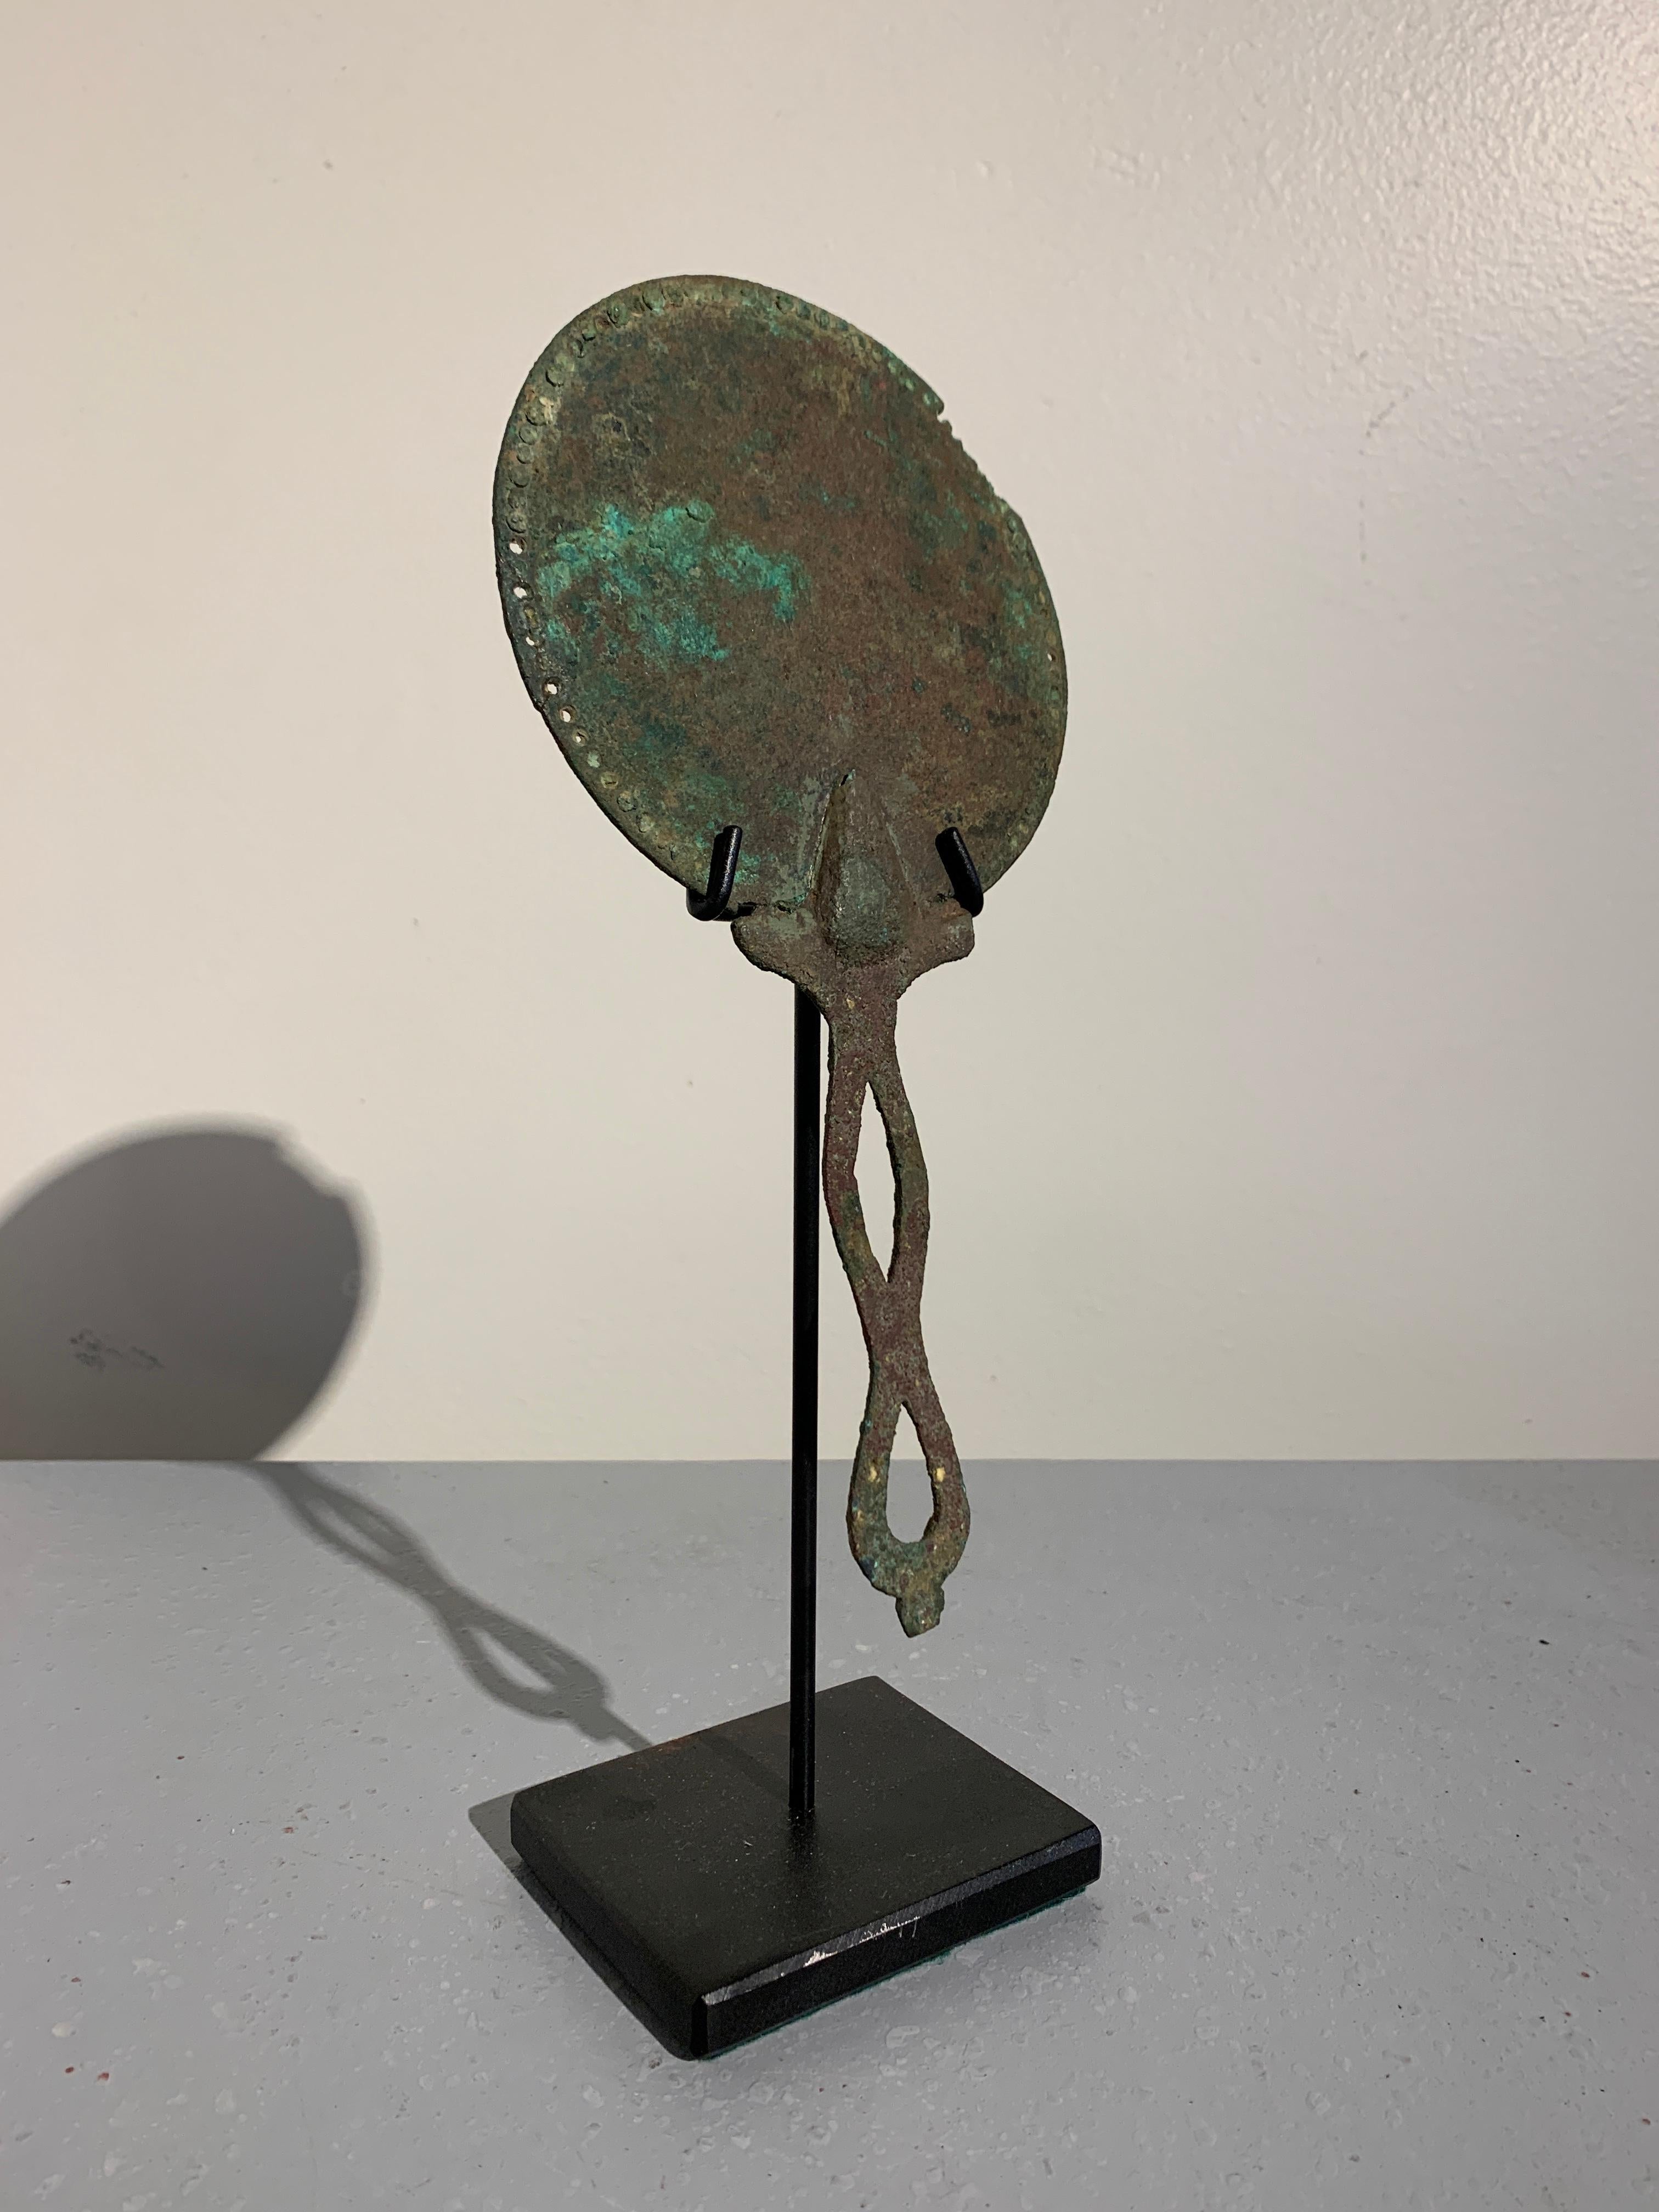 A simple and elegant Roman bronze hand mirror, late Republic Period, circa 1st century, Italy.

The bronze mirror of simple form. The round face with a pierced border design. The openwork handle of twisted form, lending an air of elegance to the